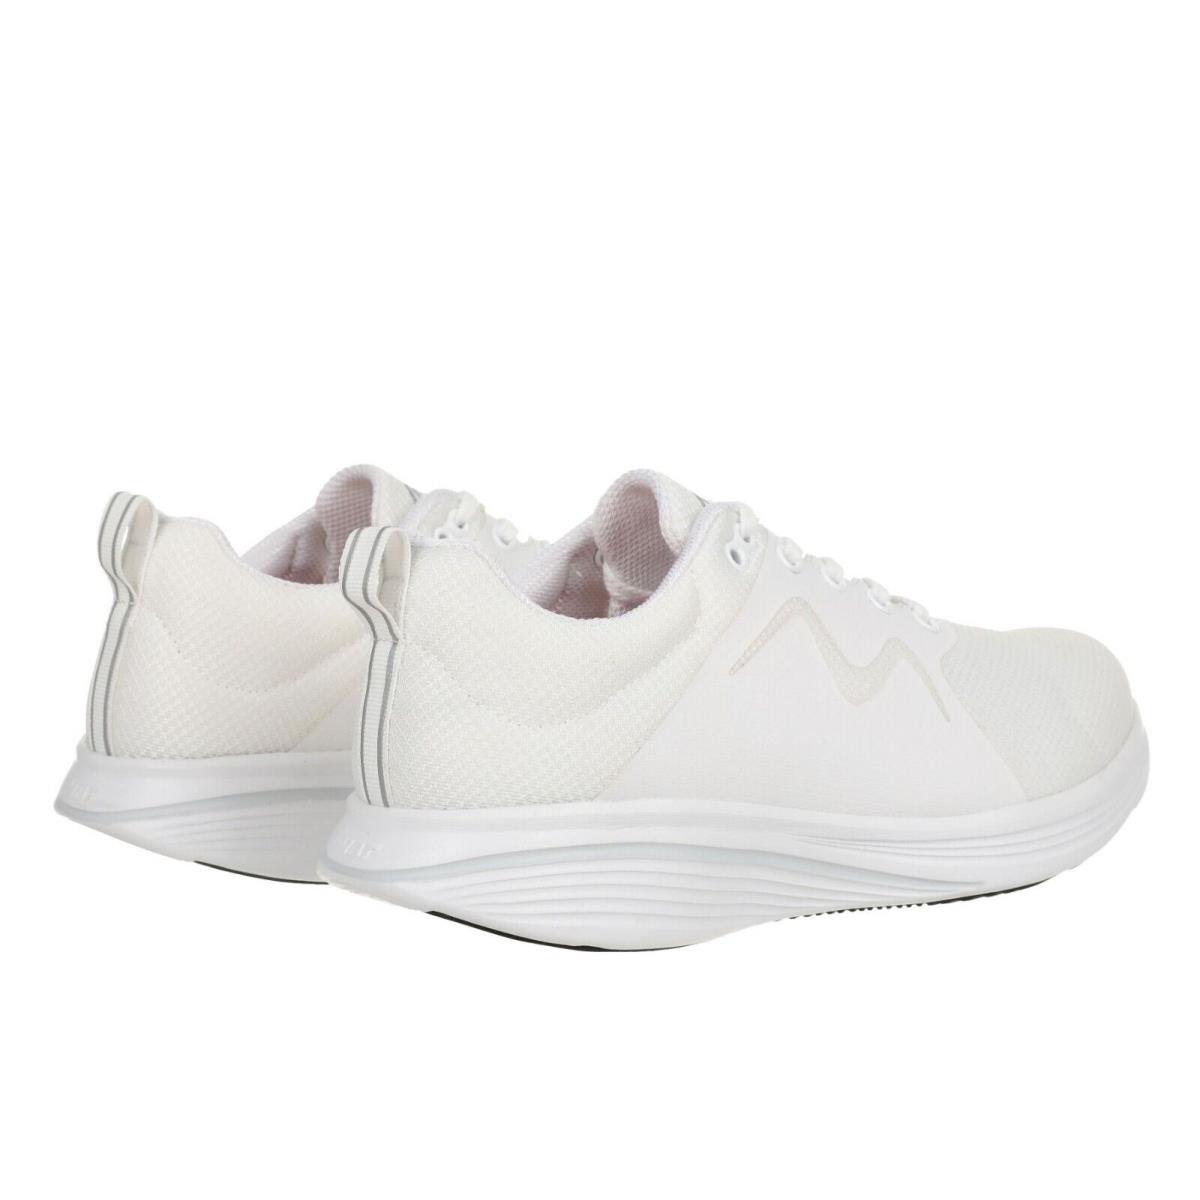 MBT shoes ACTIVE EVERYDAY WALKER - Yasu-White 1